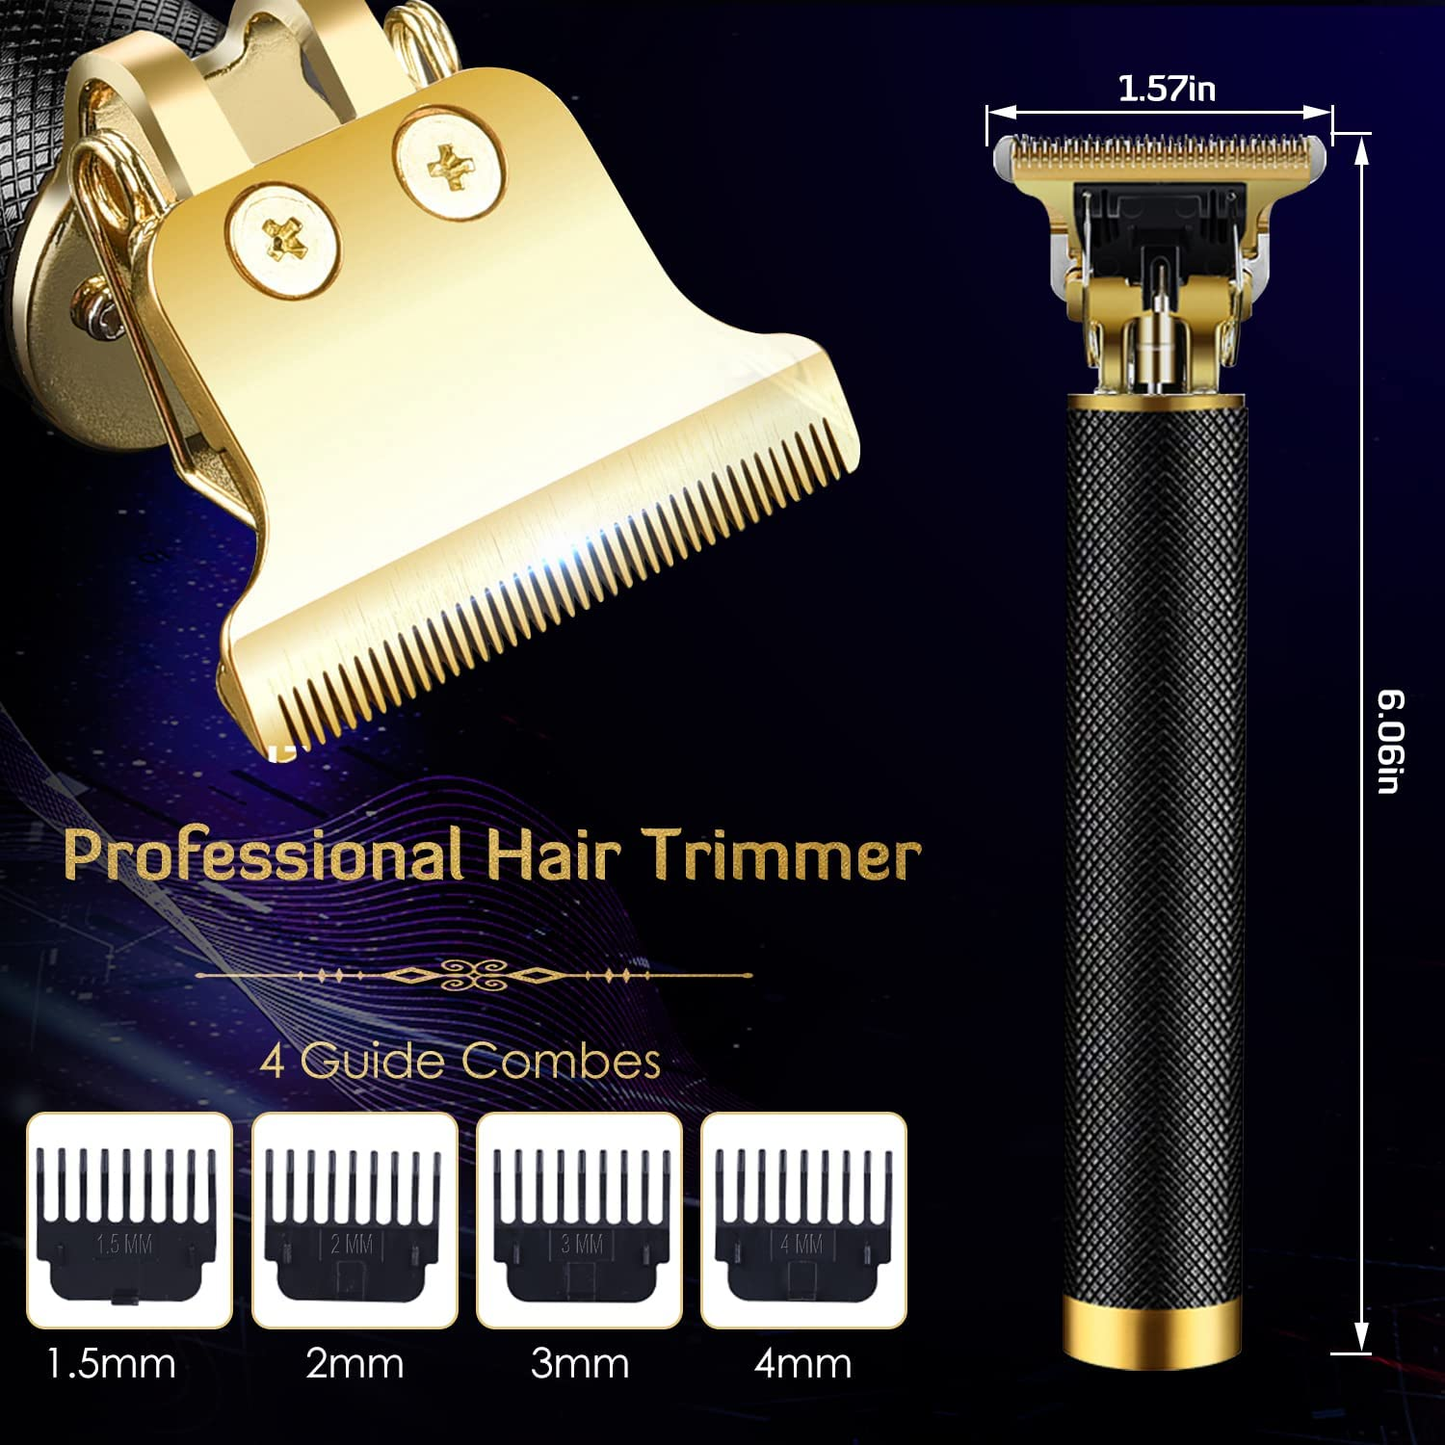 Hair Clippers for Men, Cordless Rechargeable Hair Trimmer Professional Hair Trimmer T Blade Trimmer Zero Gapped Trimmer, Electric Beard Trimmer Shaver Hair Cutting Kit for Men (Black)